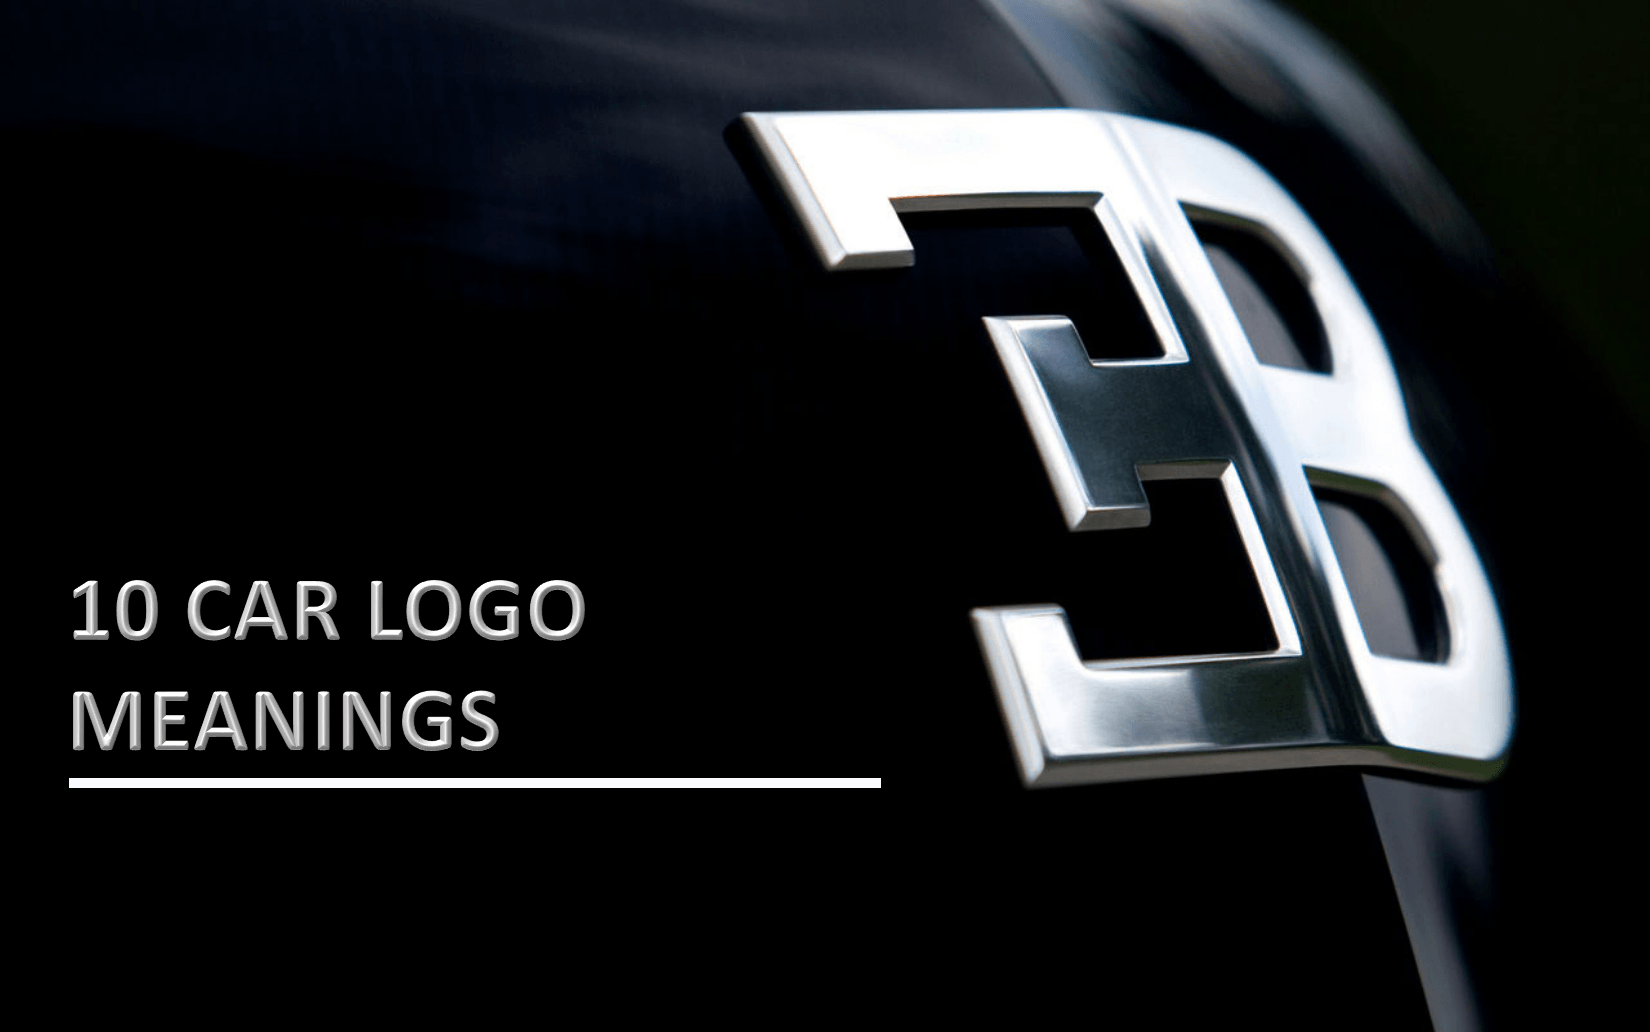 Automotive Import Logo - 10 Car Logo Meanings You May Not Expect - CAR FROM JAPAN